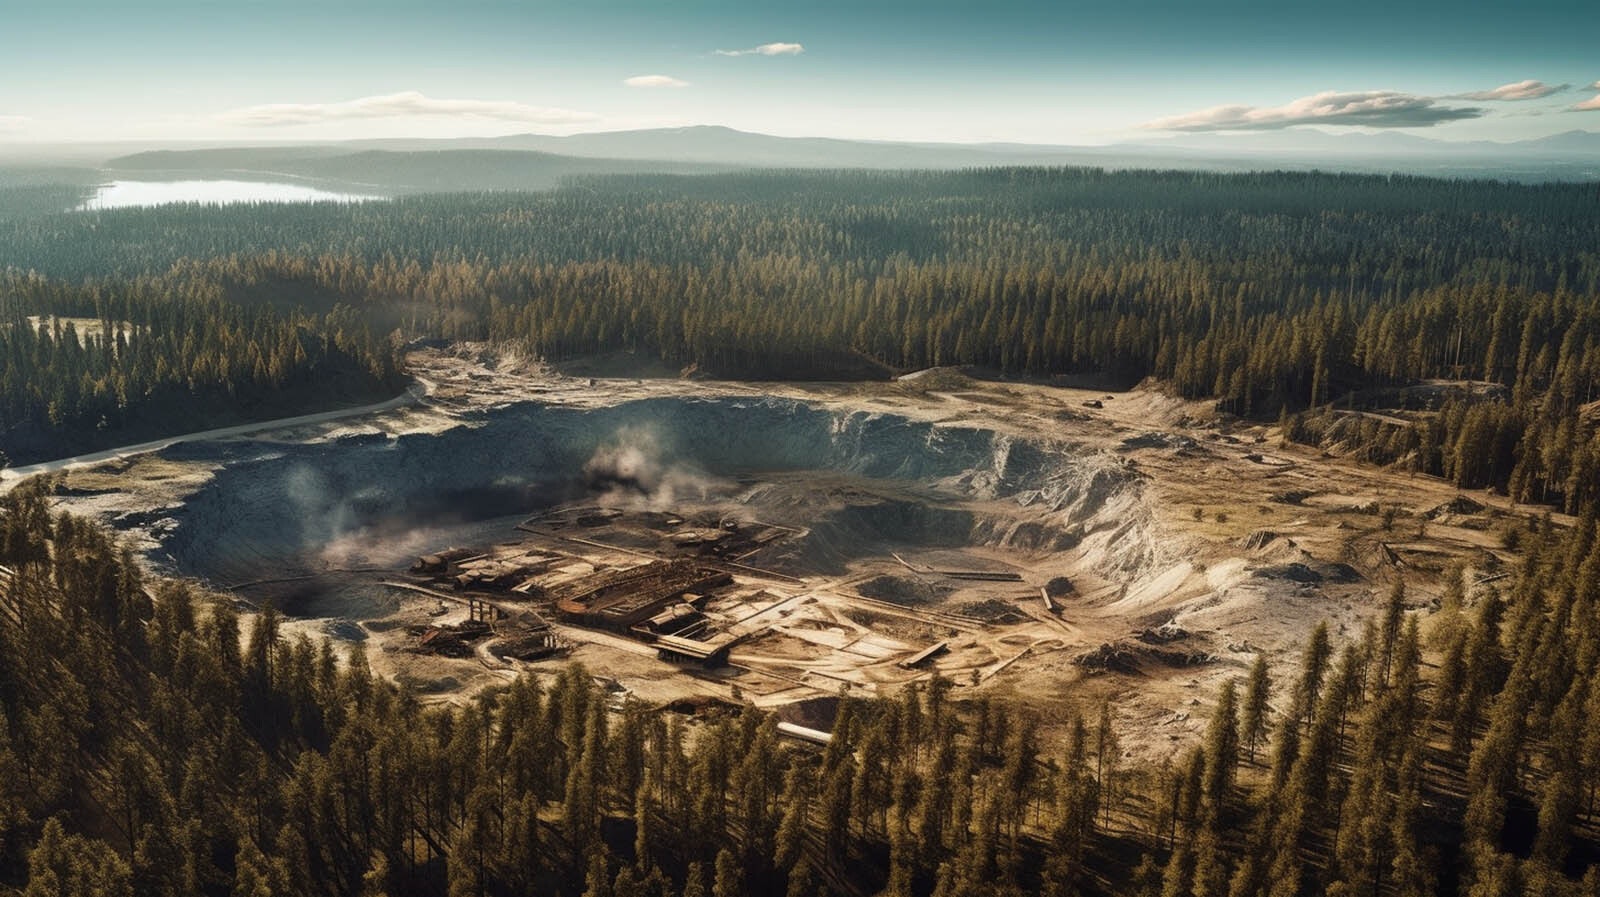 Not much is known about the minerals beneath the park, but this illustration shows an open-pit mine in Yellowstone.